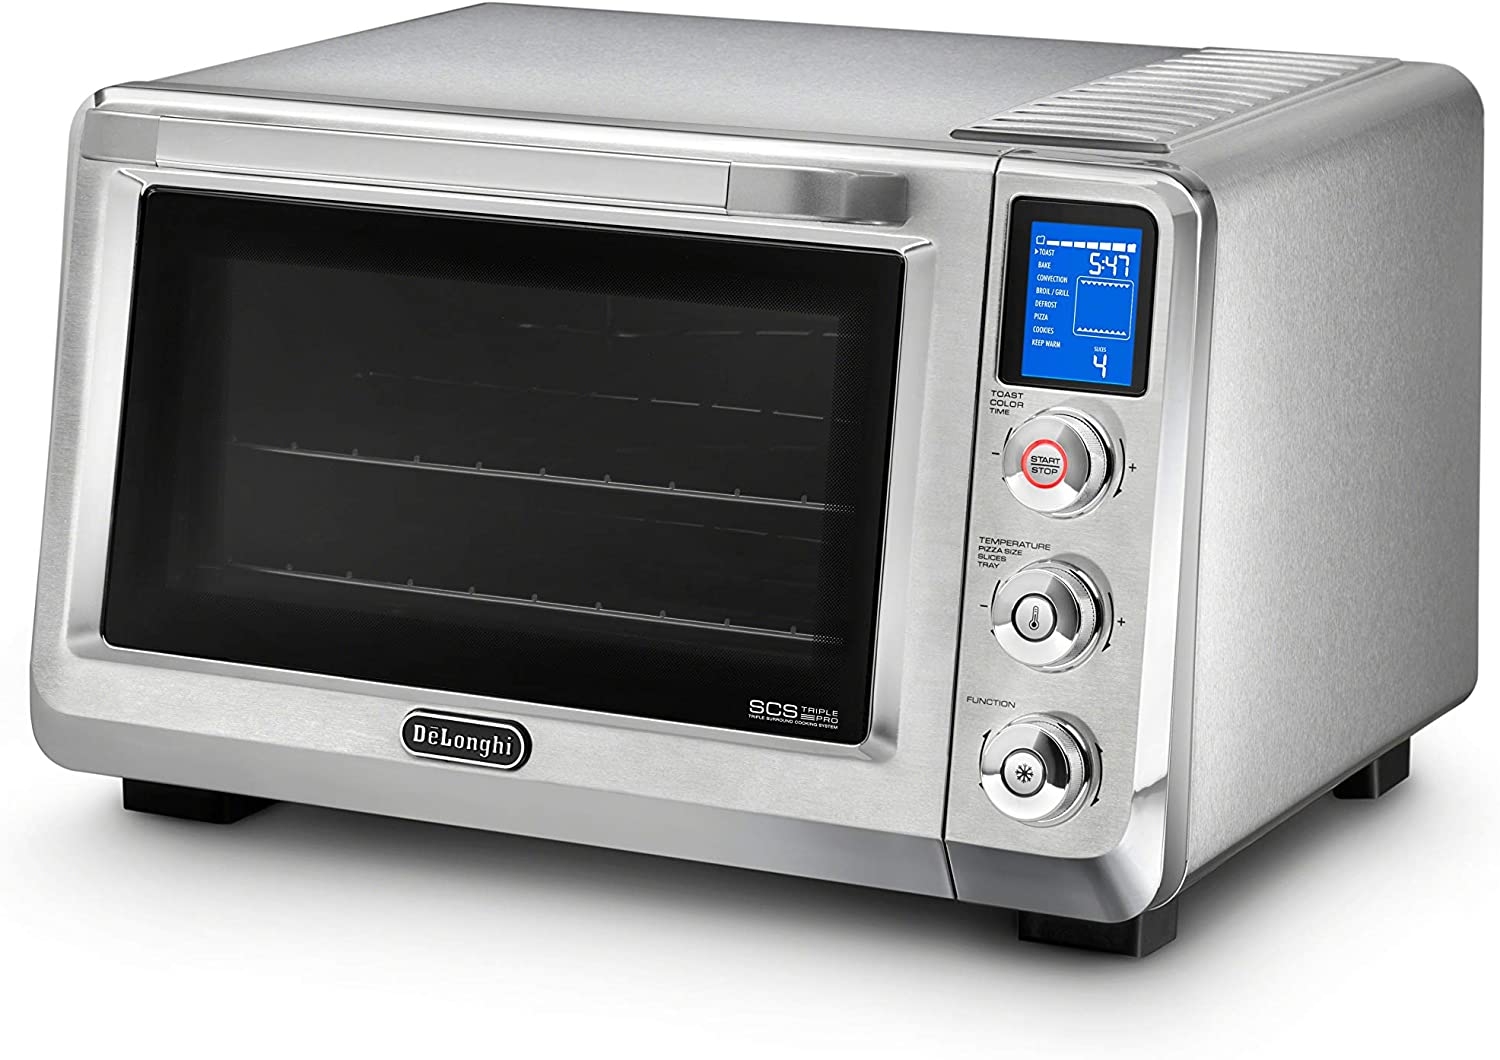 De’Longhi Air Fry Oven, Premium 9-in-1 Digital Air Fry Convection Toaster Oven, Grills, Broils, Bakes, Roasts, Keep Warm,